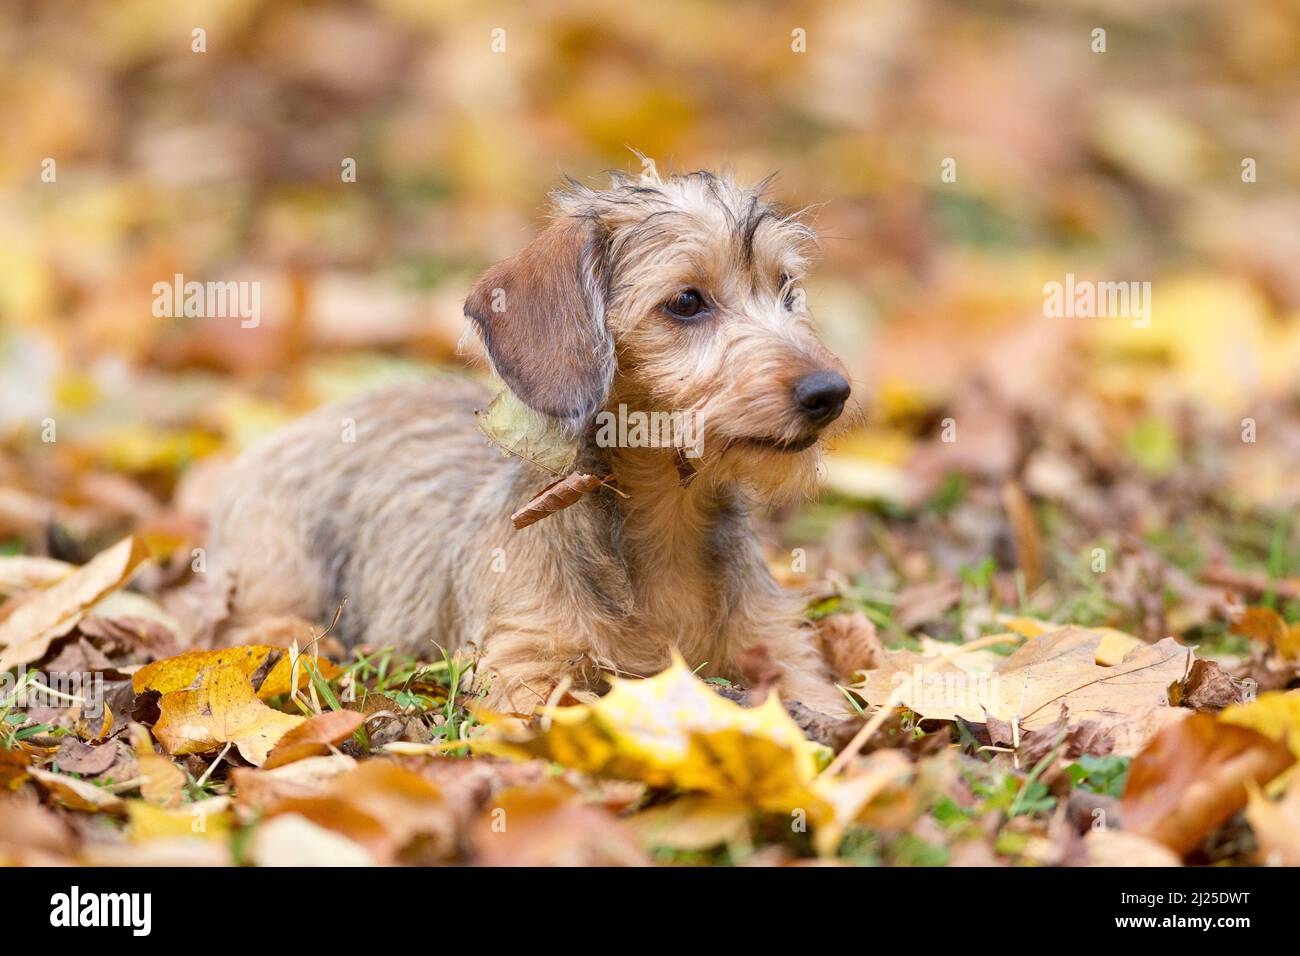 Wire-haired Kaninchen-Dachshund lying in leaf litter. Germany Stock Photo